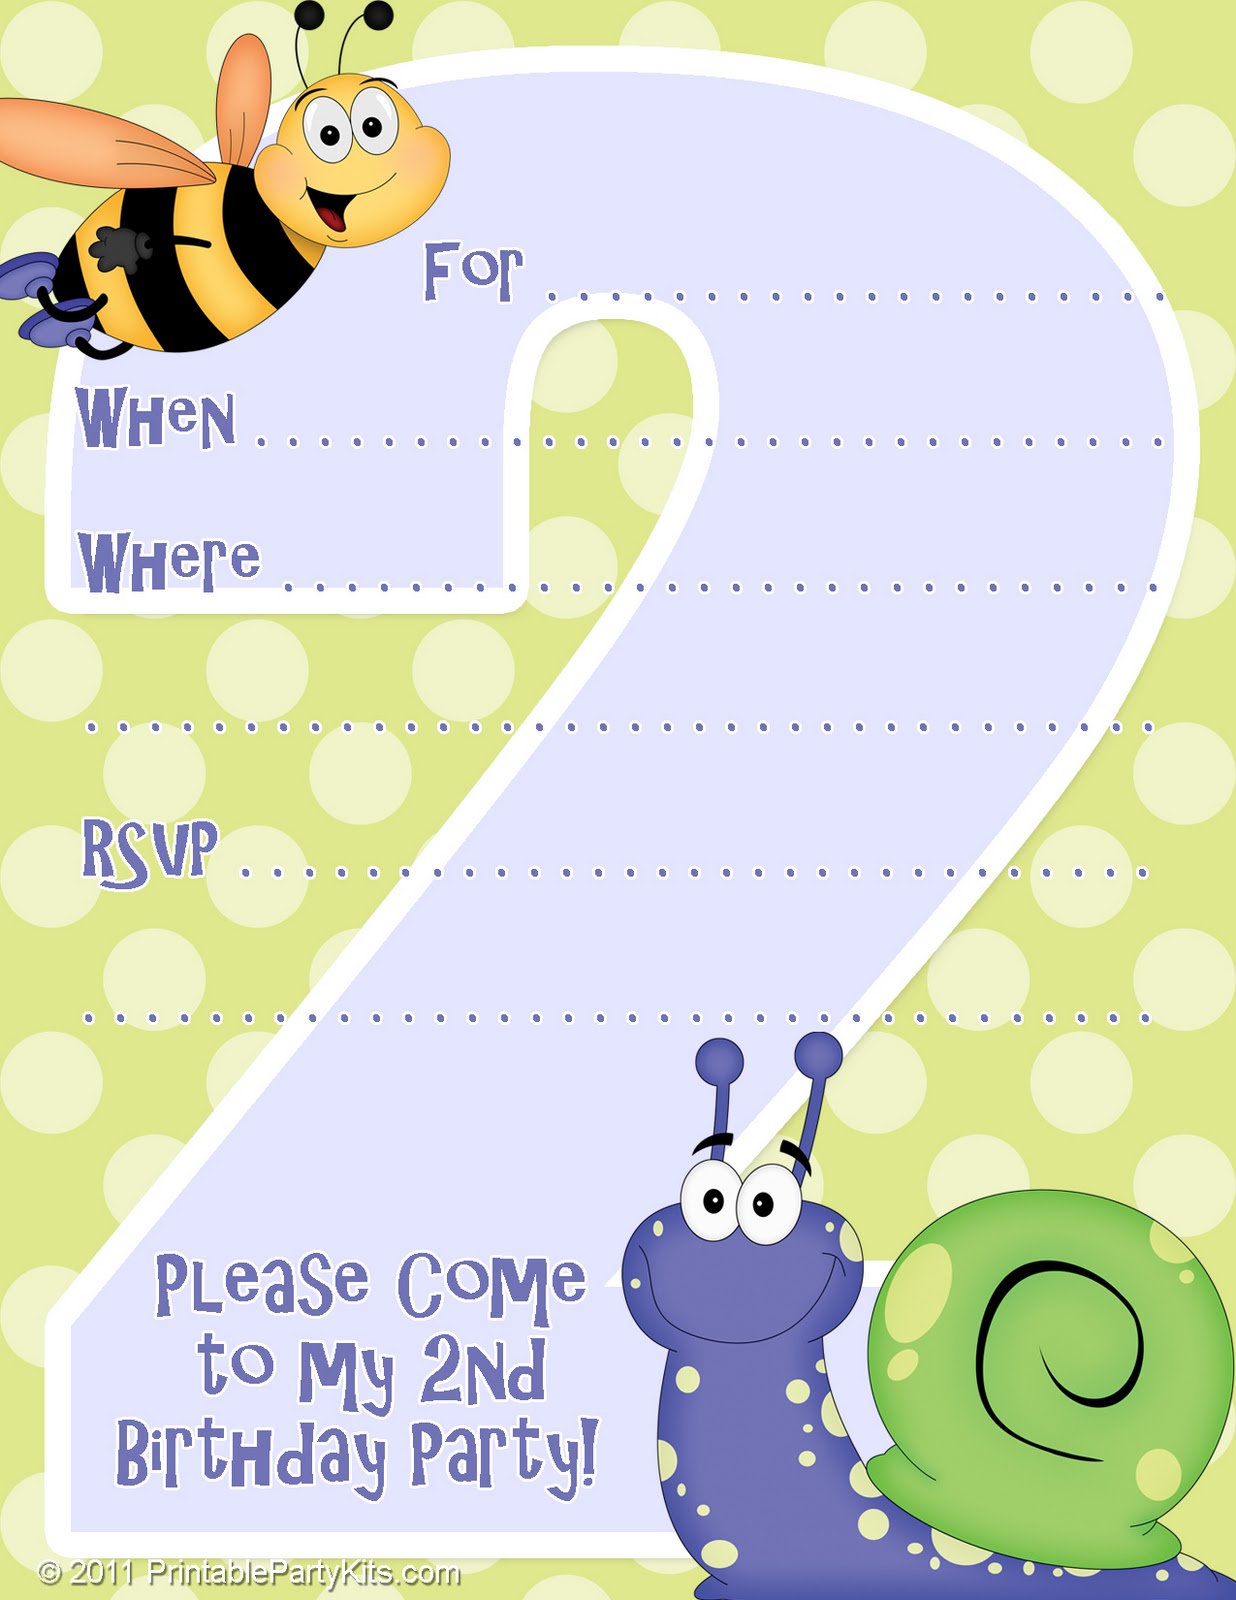 Free Printable Party Invitations Invitation Template For A 2nd Birthday Party